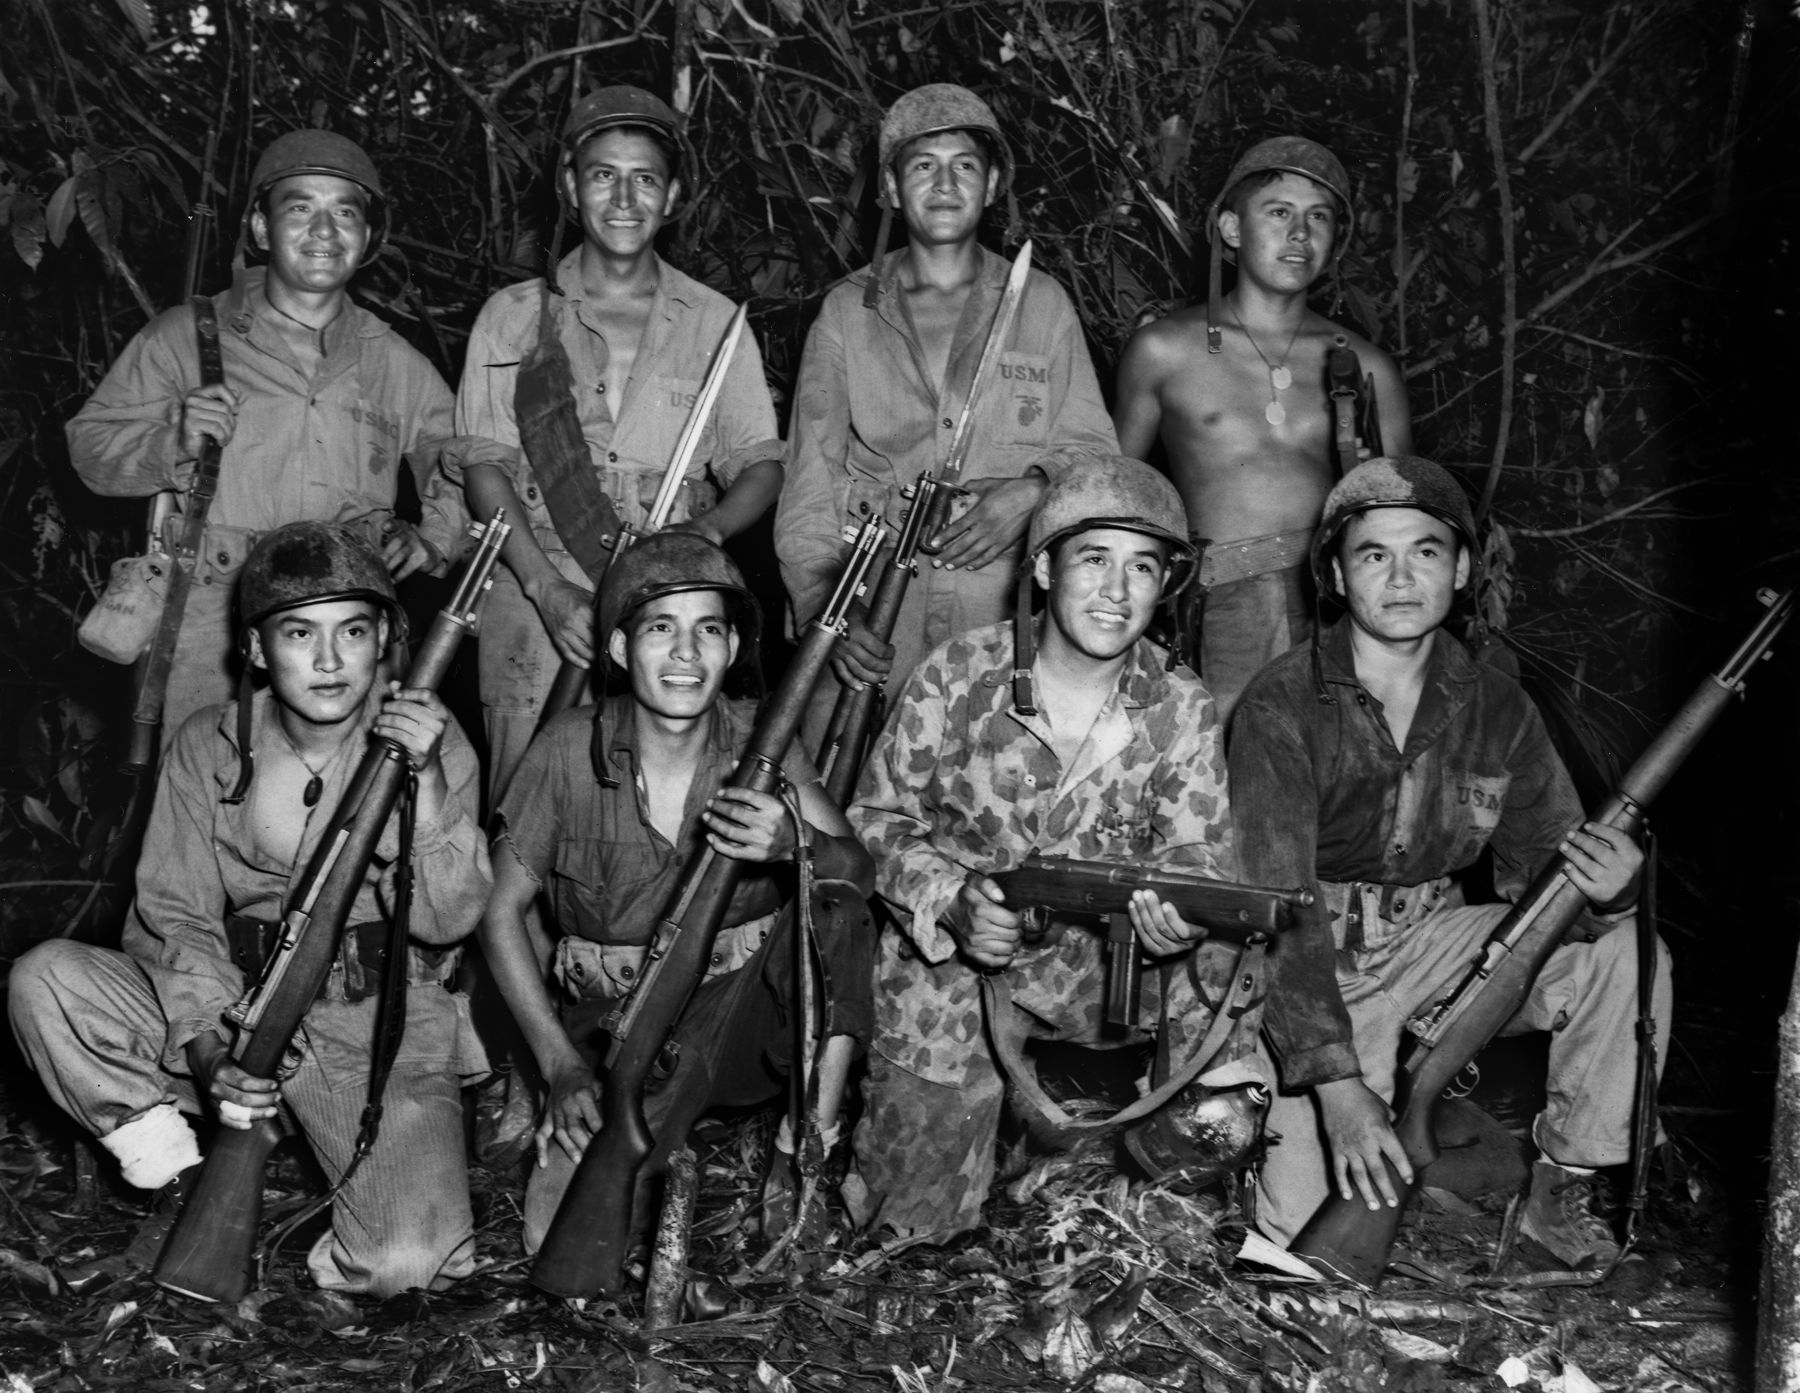 Serving with a U.S. Marine signal unit on Bougainville in December 1943, these Navajo code talkers were Marines in every sense of the word.